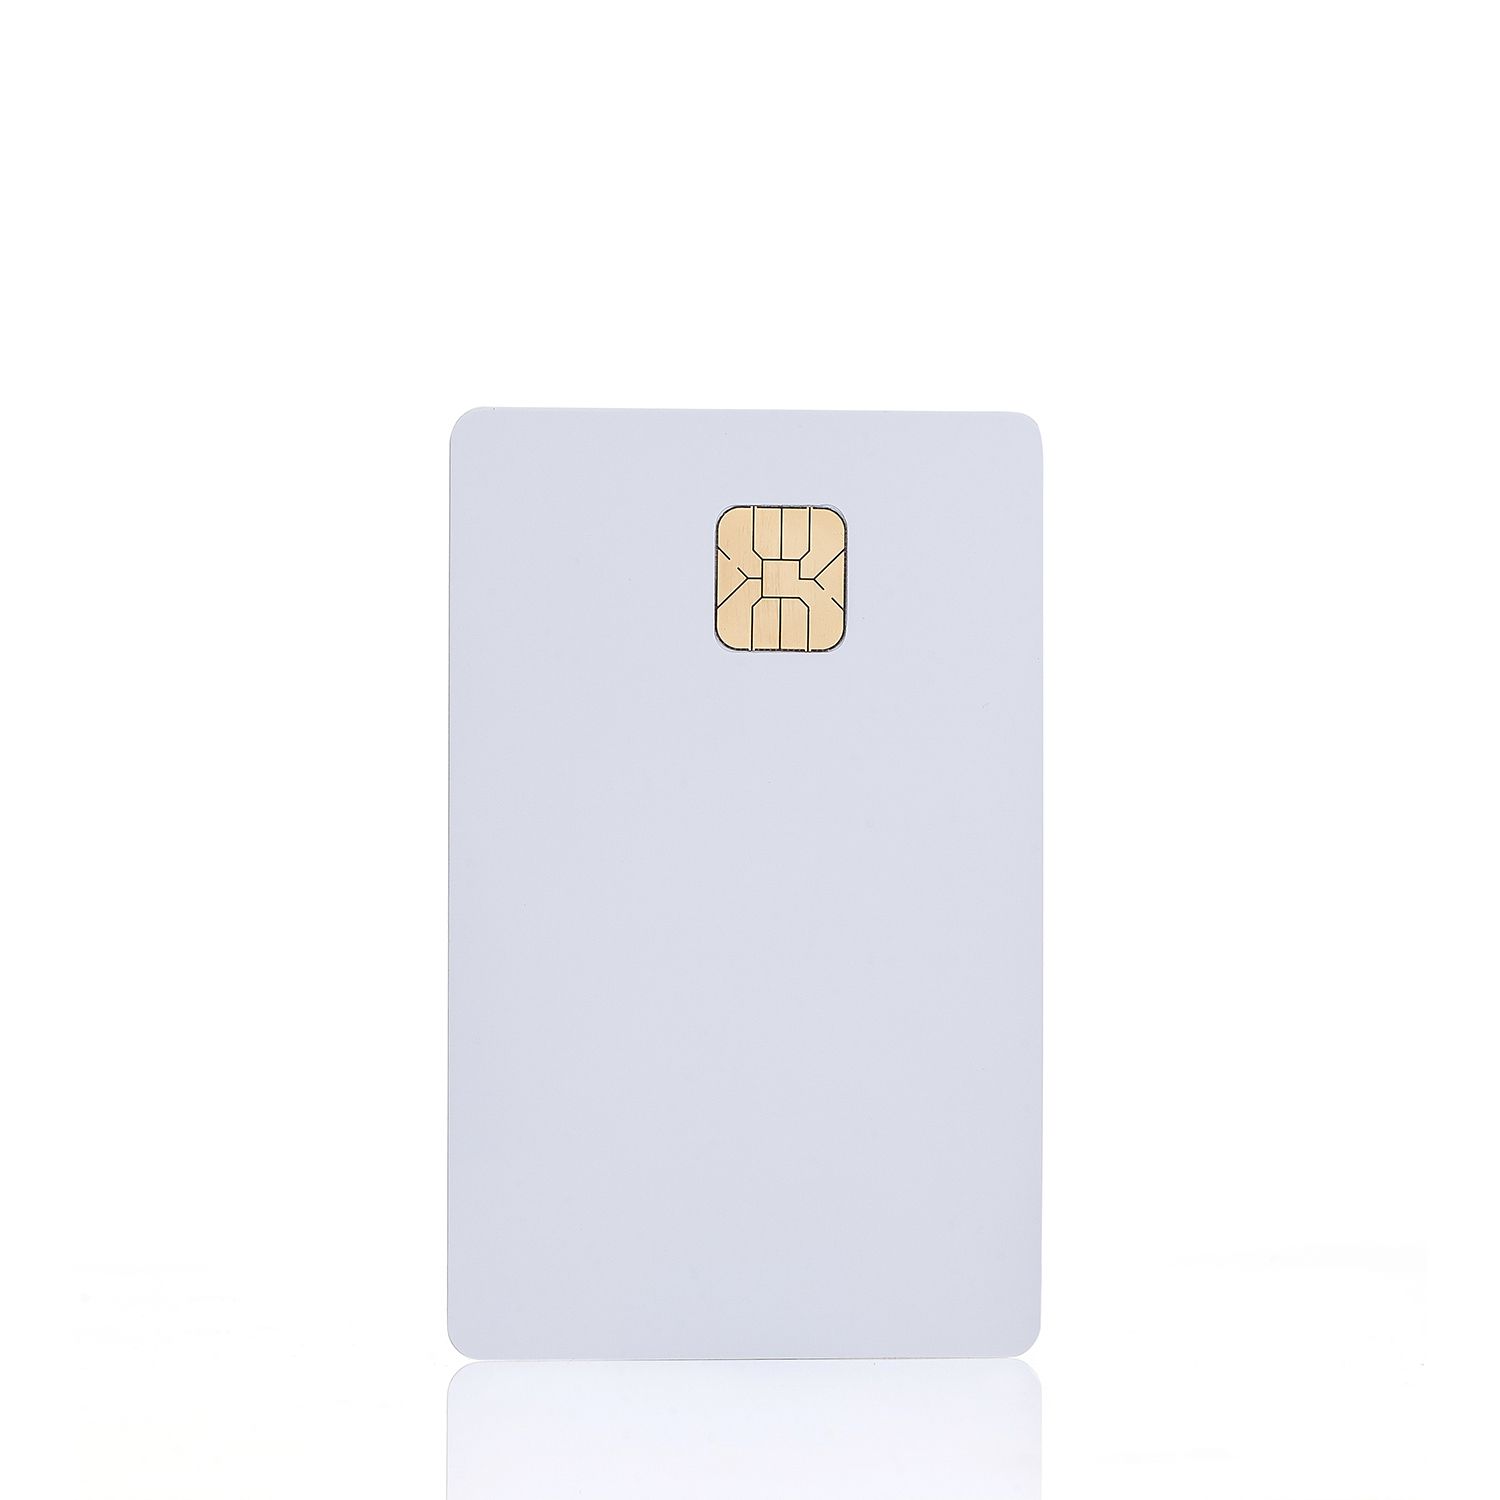 VMS Professional PVC Card with Chip Contact smart card